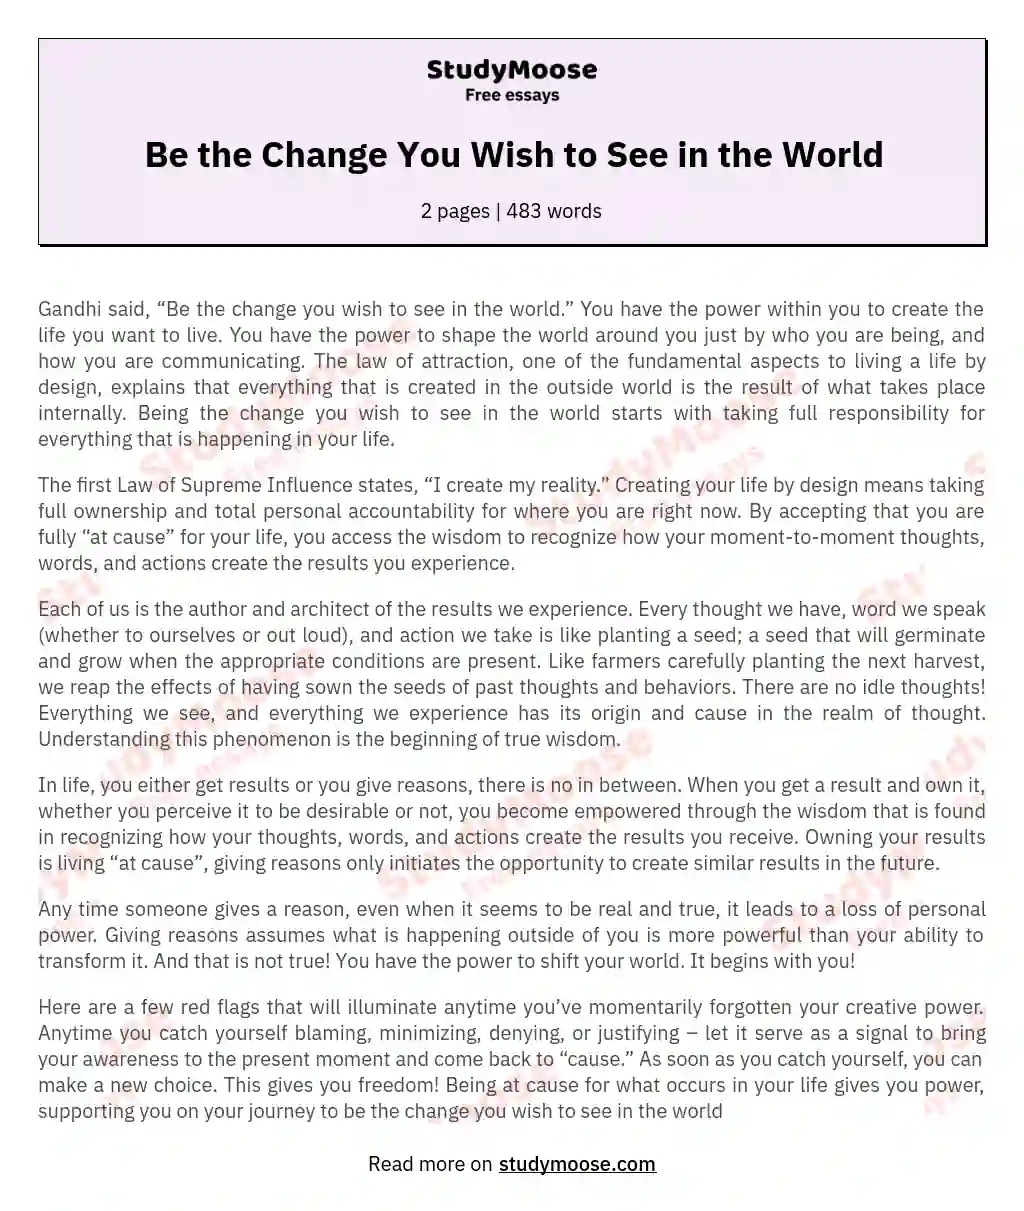 Be the Change You Wish to See in the World essay